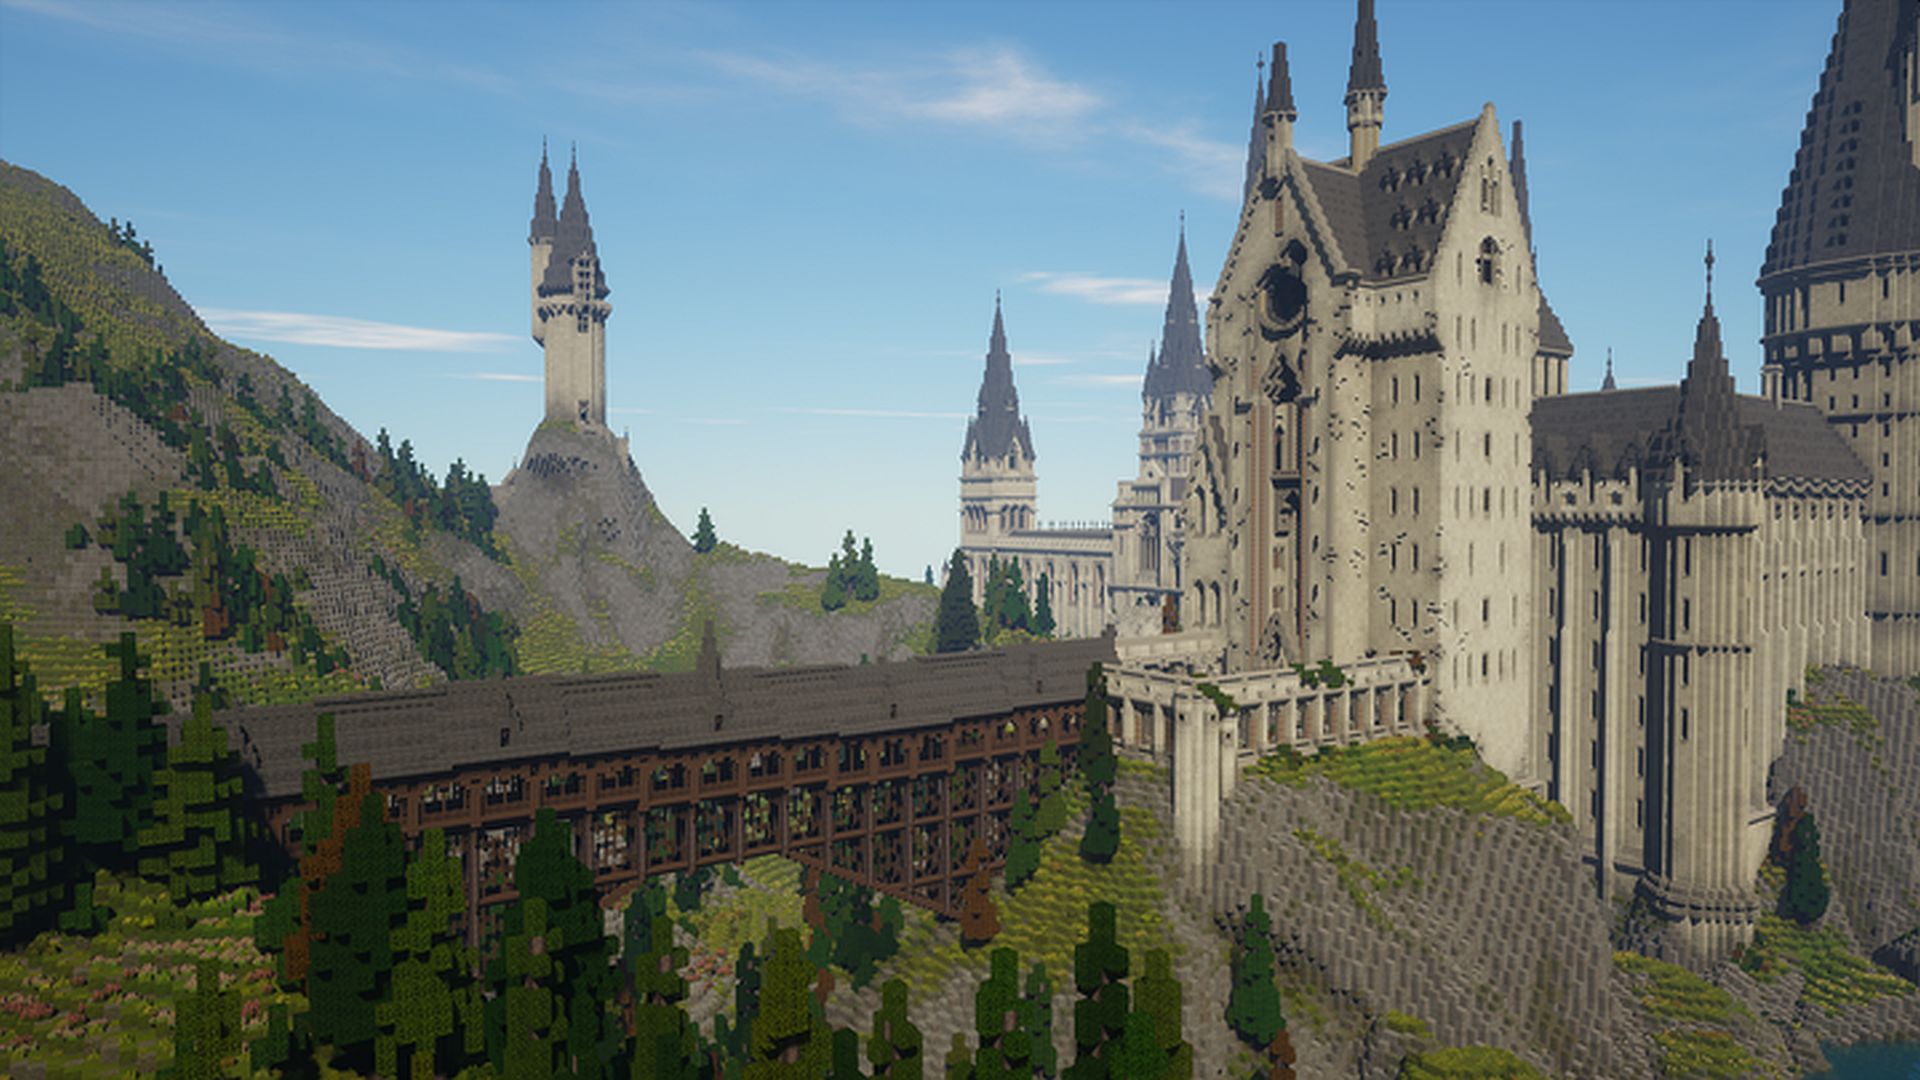 Minecraft Hogwarts: how to play this cool Minecraft Harry Potter RPG map